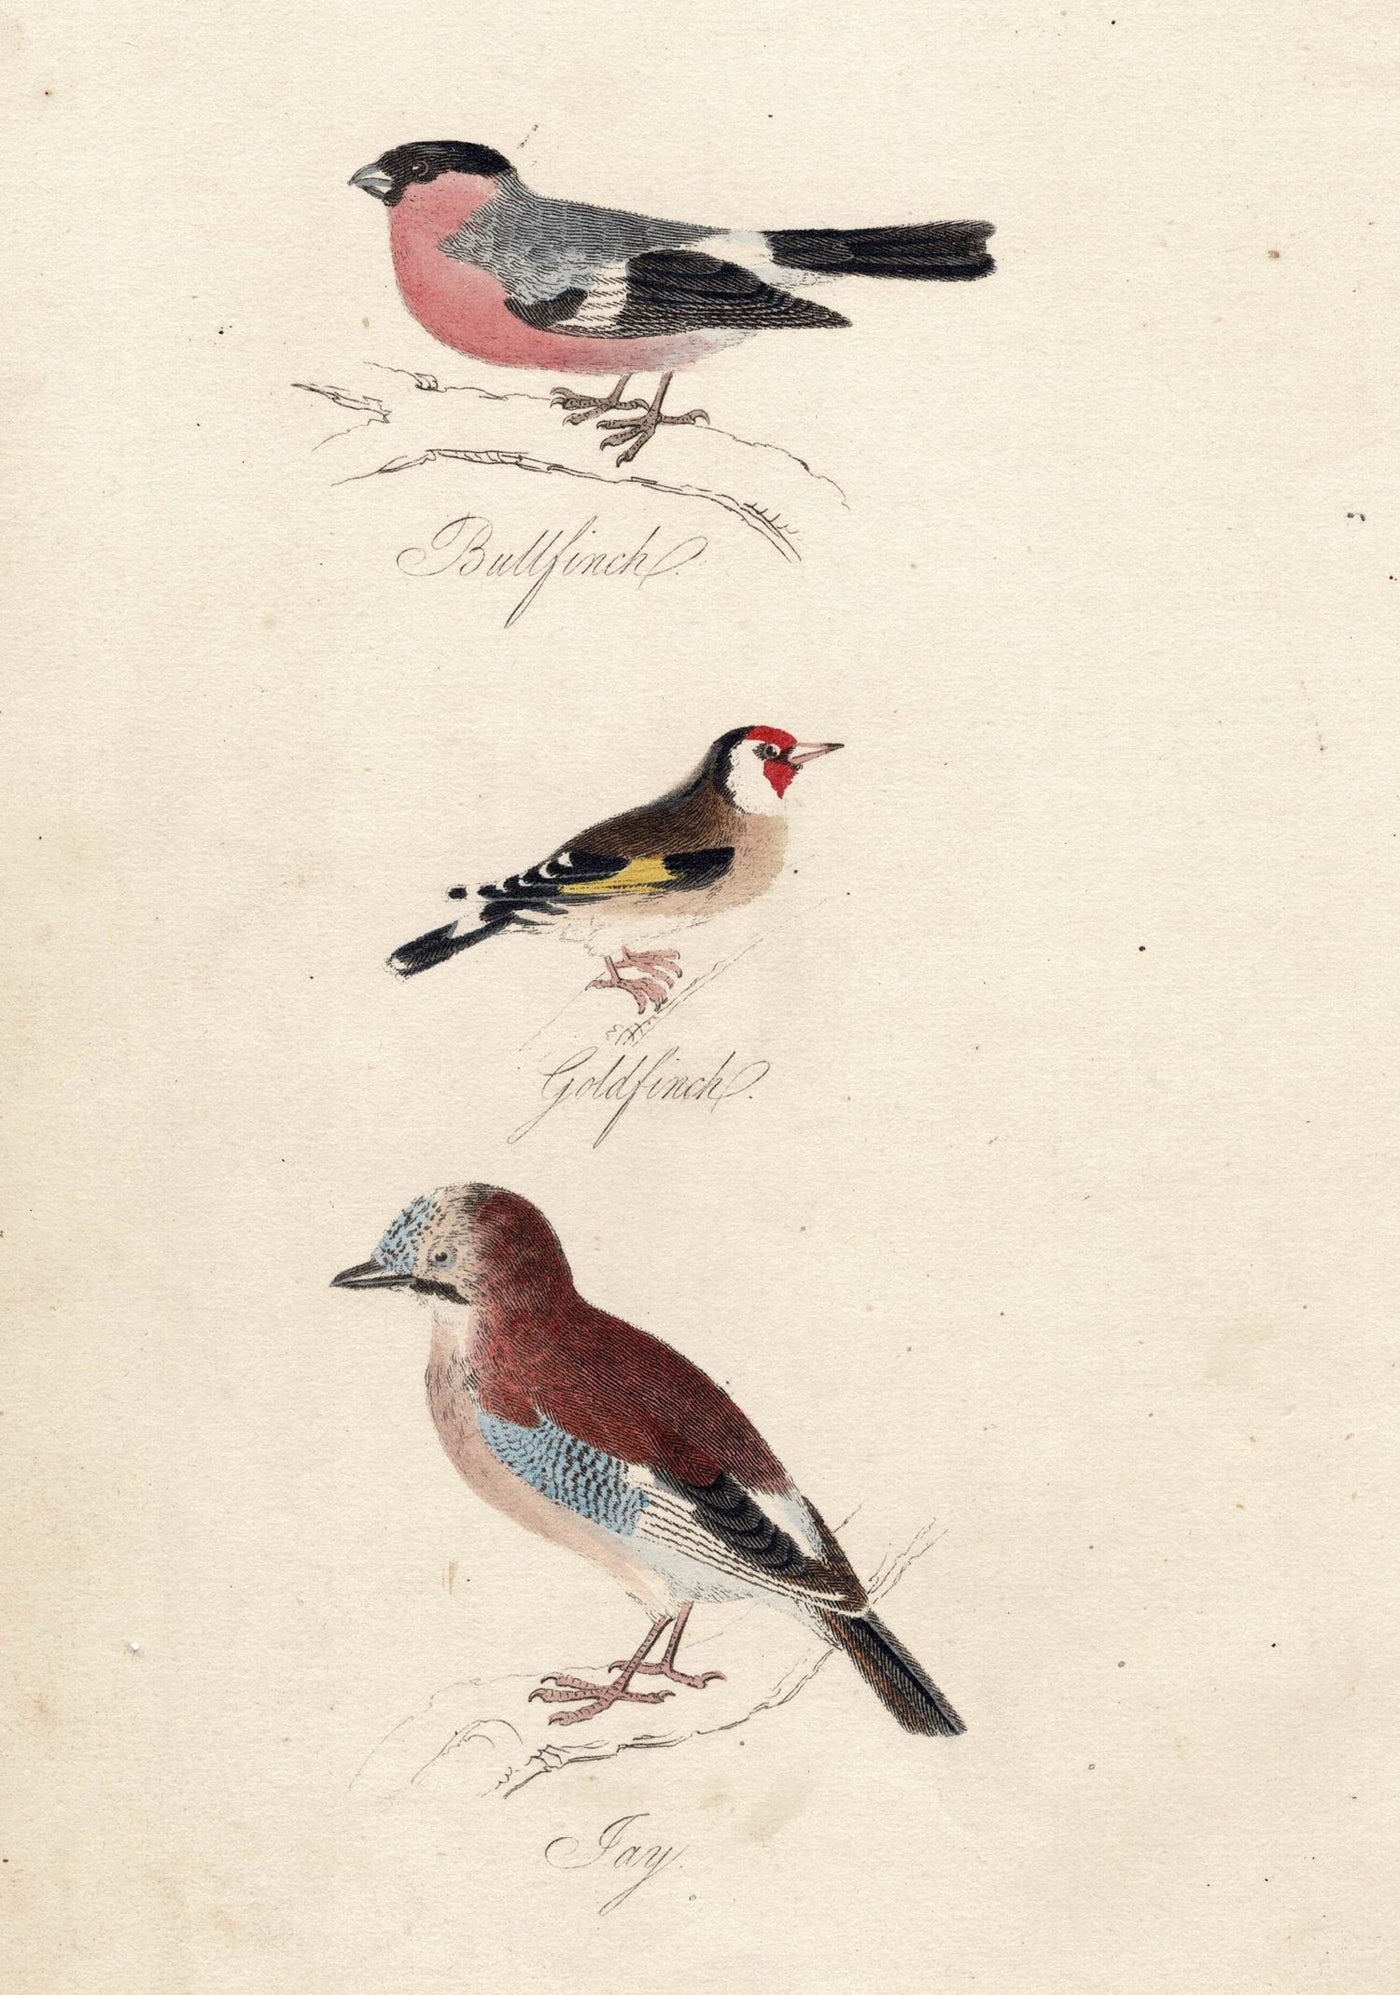 Bullfinch, Goldfinch and Jay guaranteed antique print published 1834